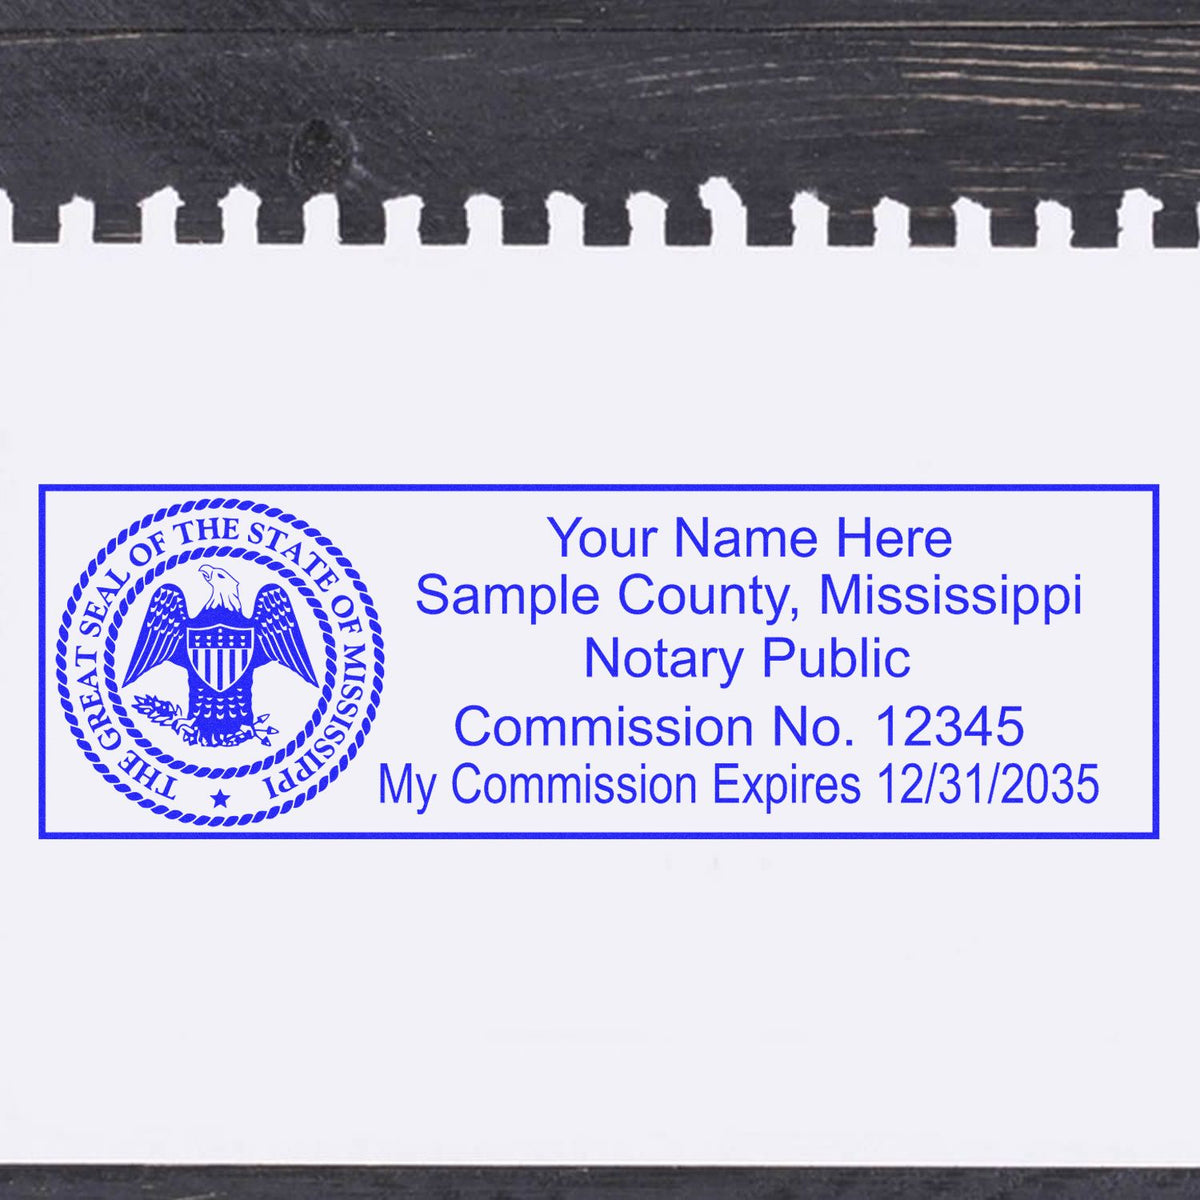 The PSI Mississippi Notary Stamp stamp impression comes to life with a crisp, detailed photo on paper - showcasing true professional quality.